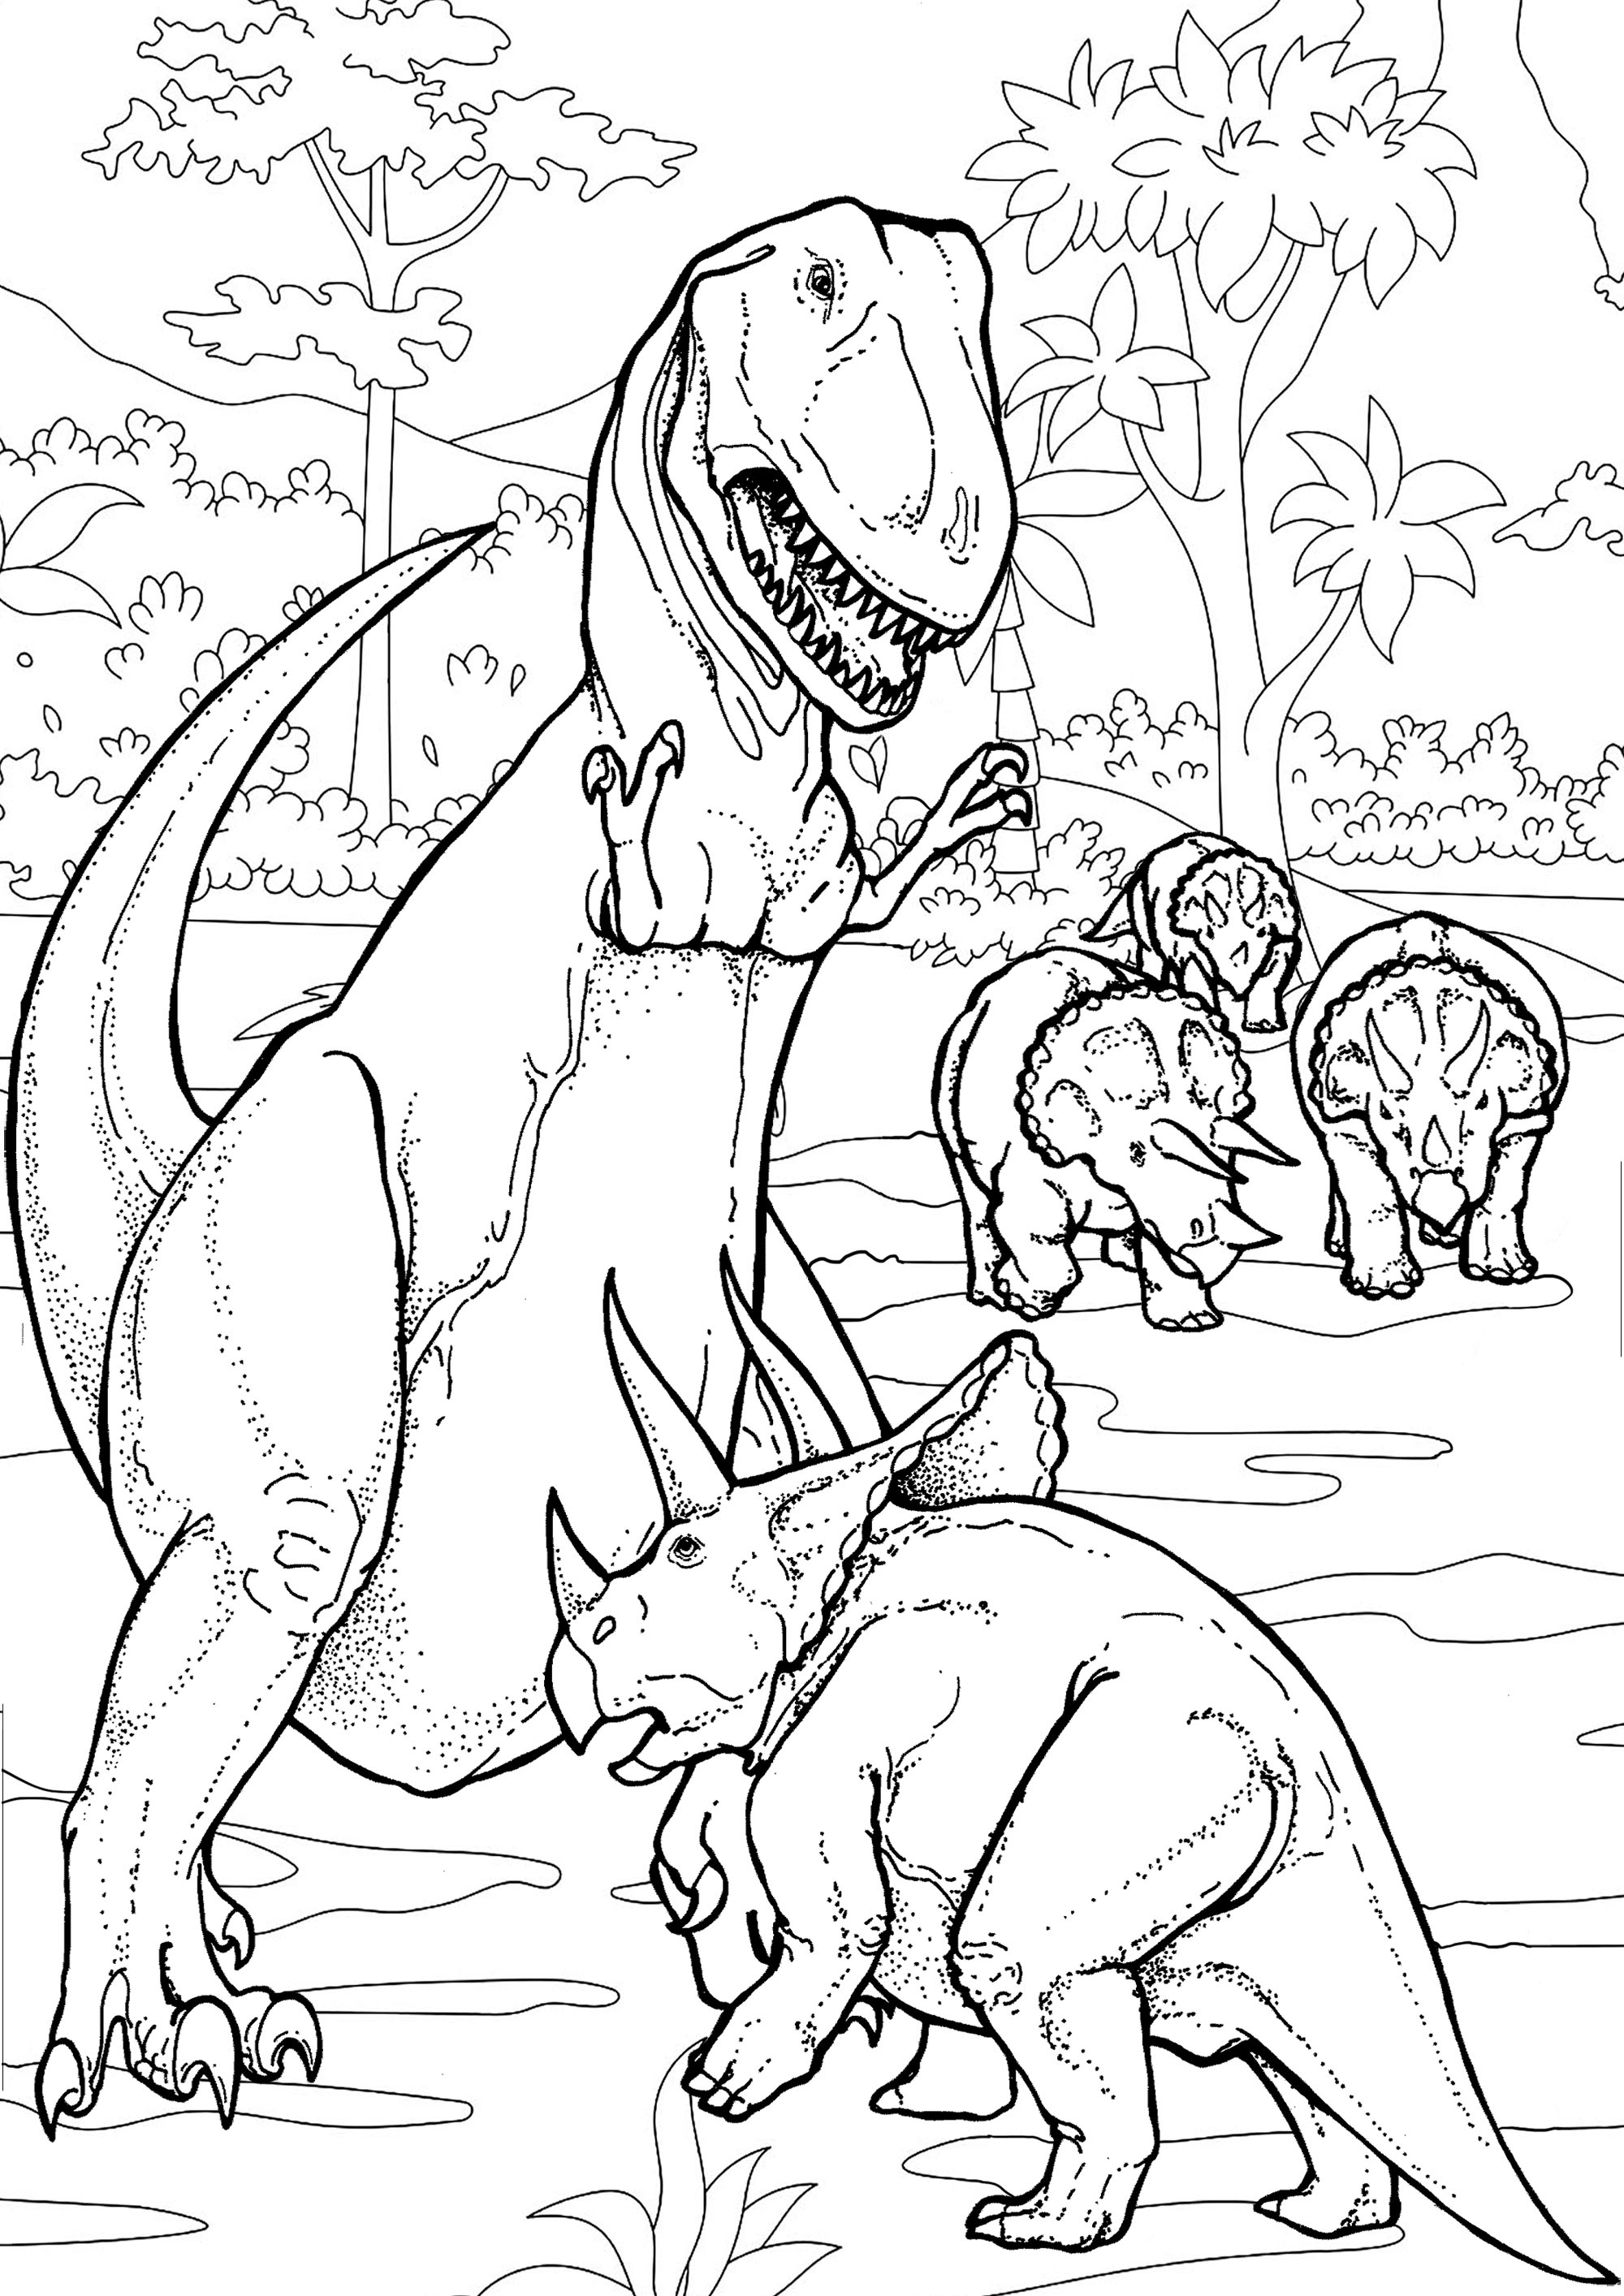 Playing with friends Coloring Page